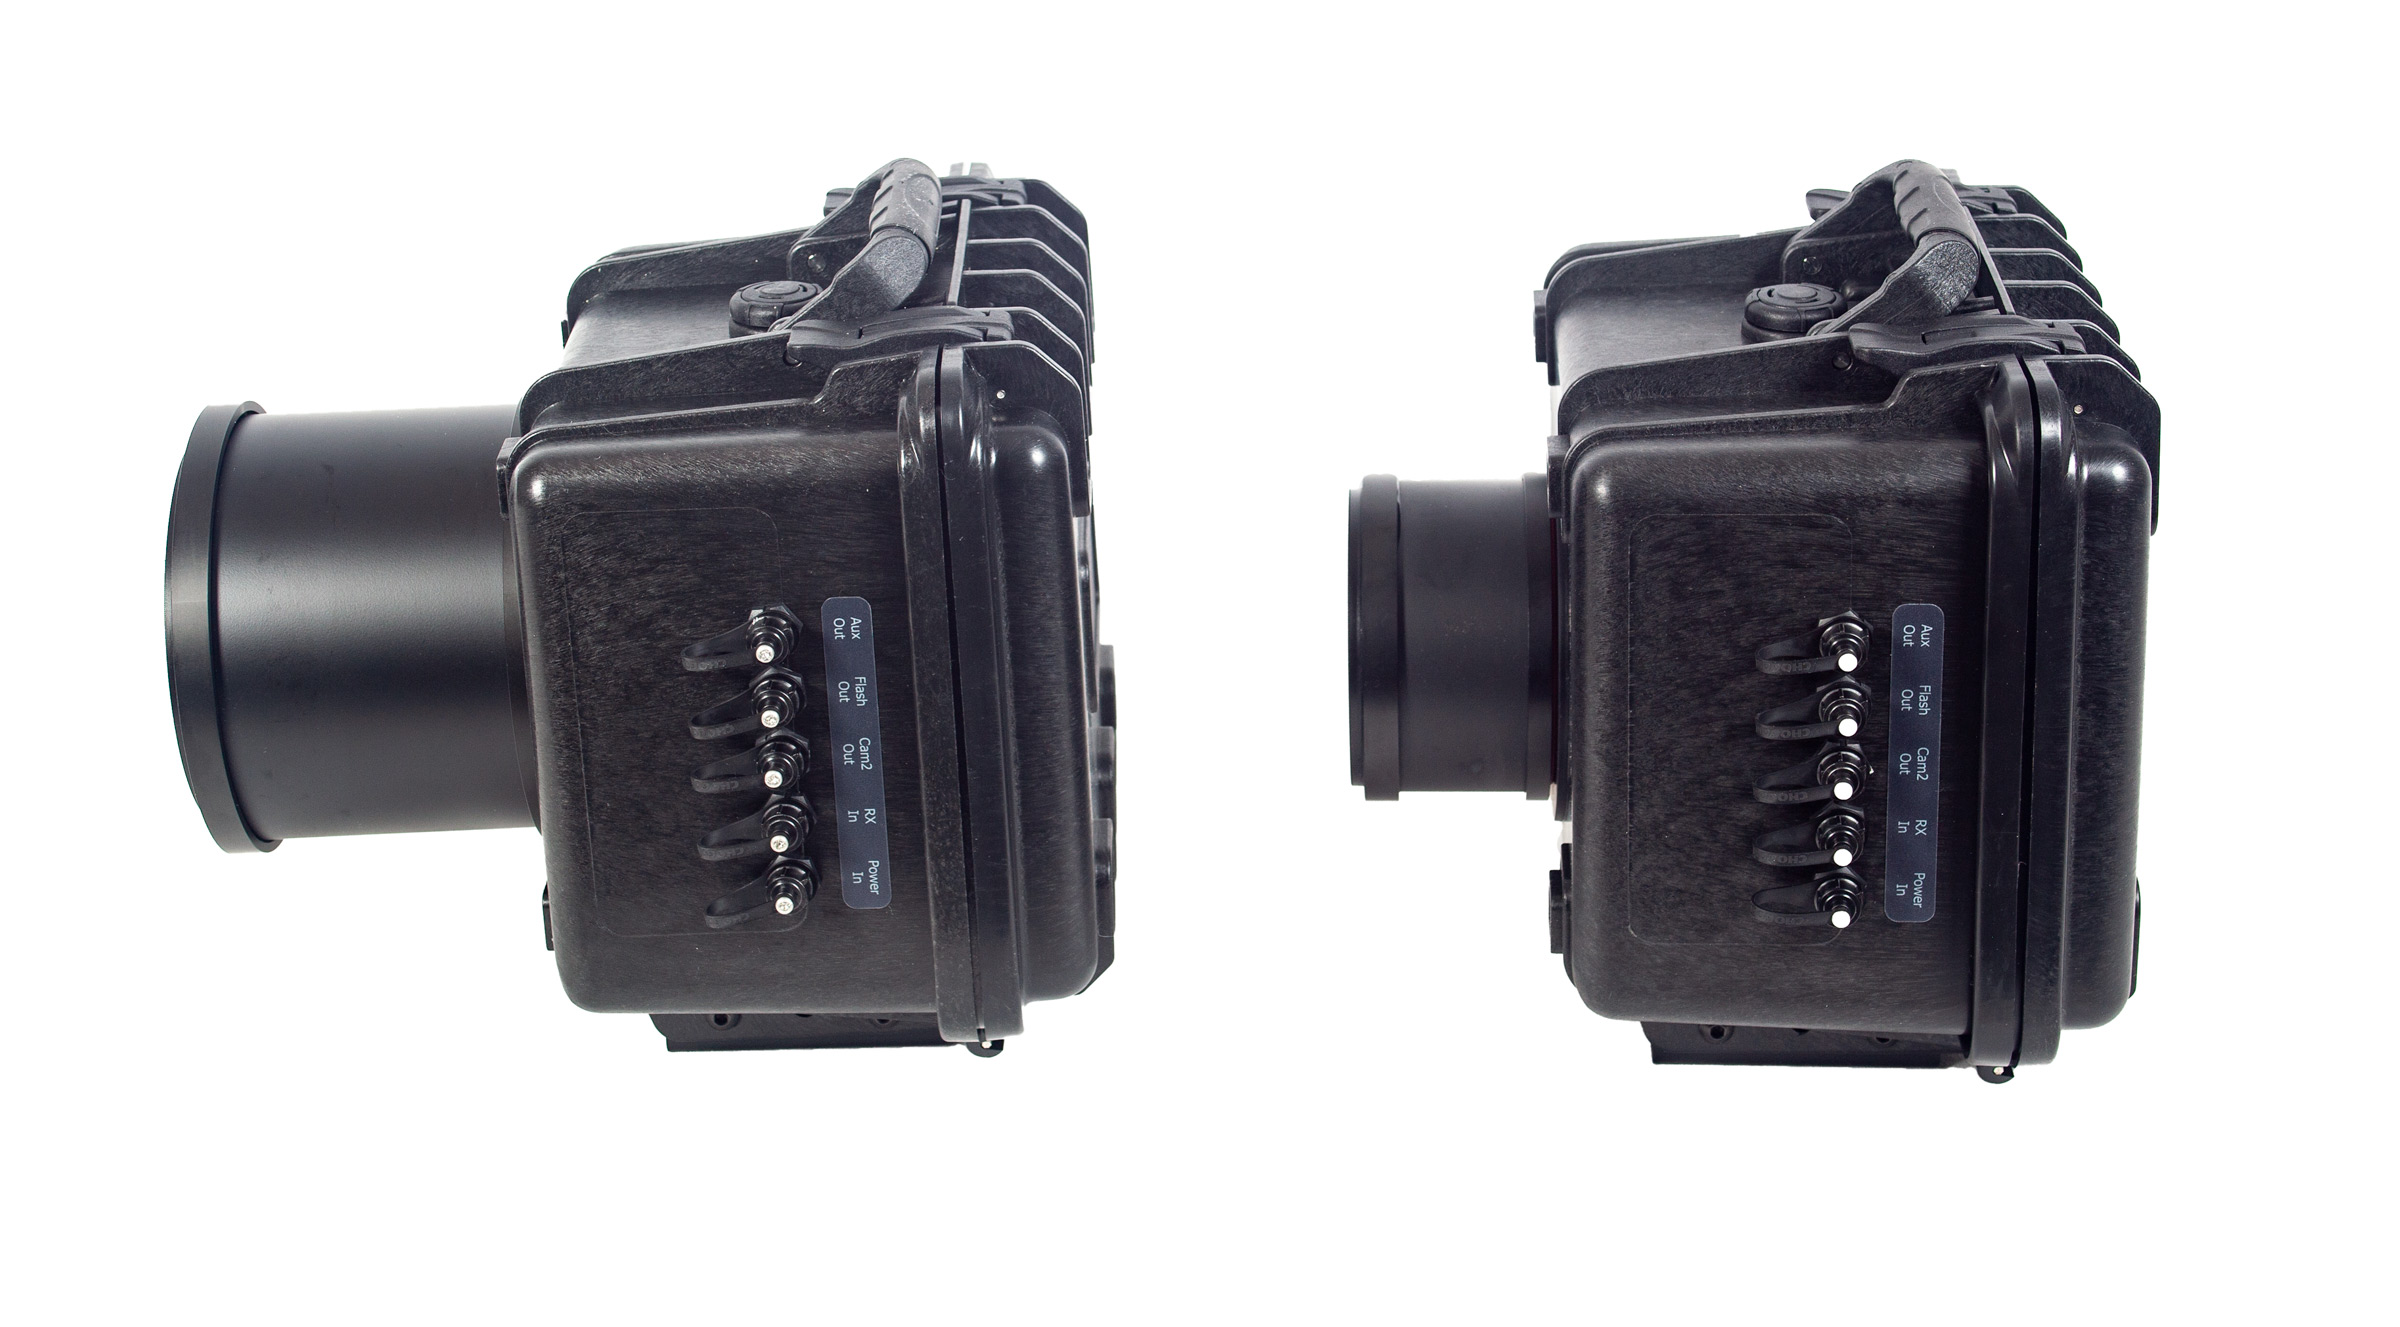 Standard vs XLLT Scout Camera Boxes Side View